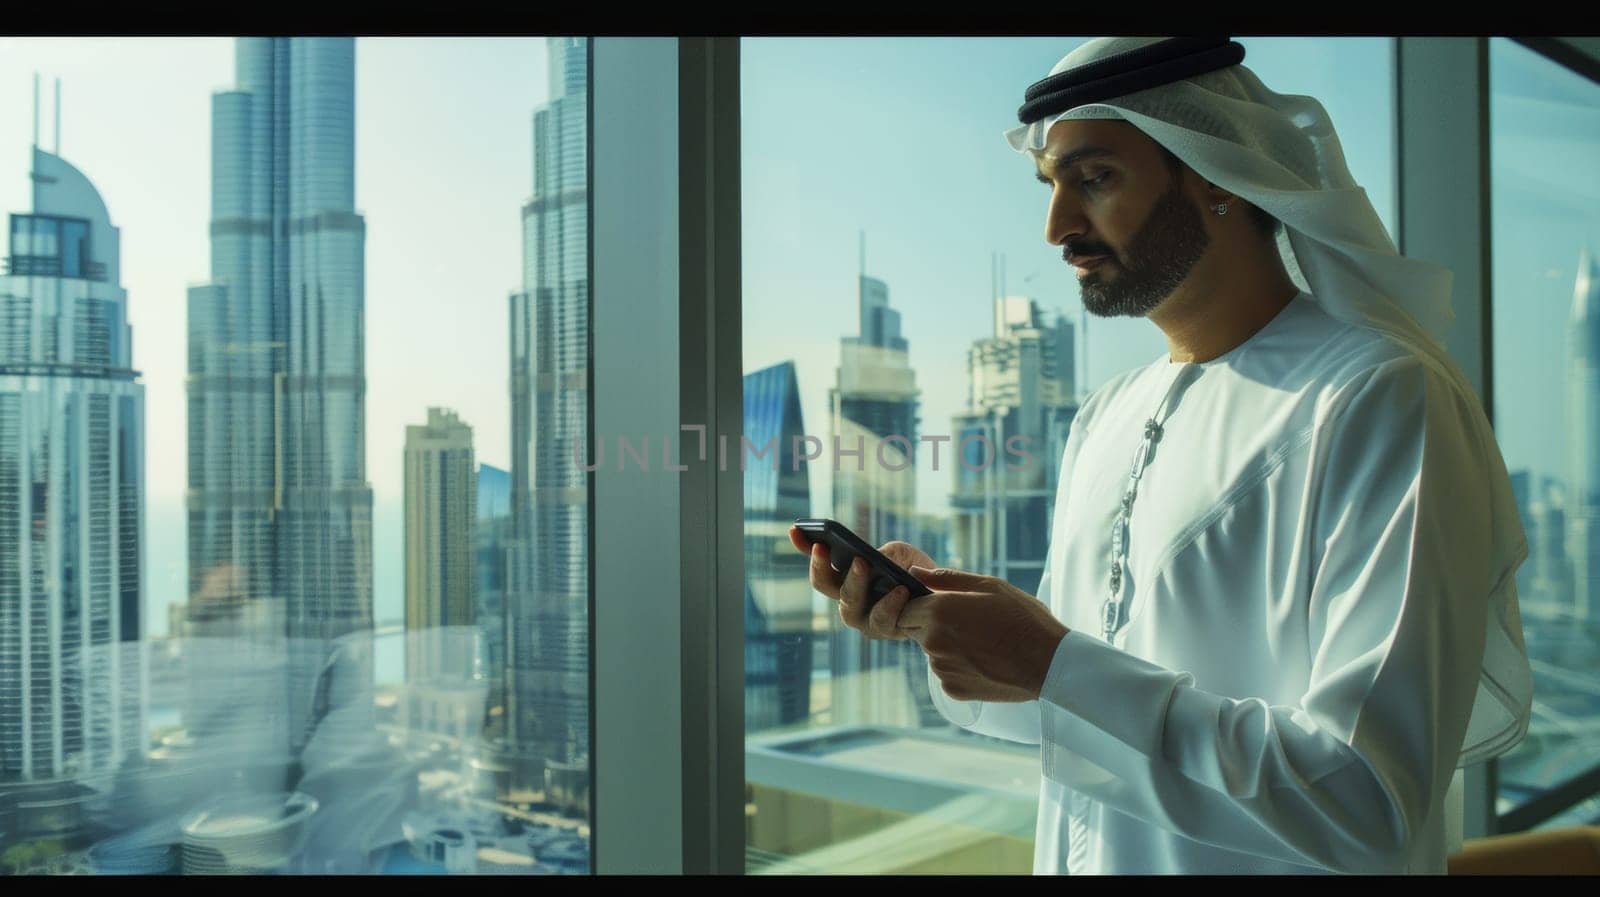 Young arab guy holds a smartphone in a modern office overlooking dubai.